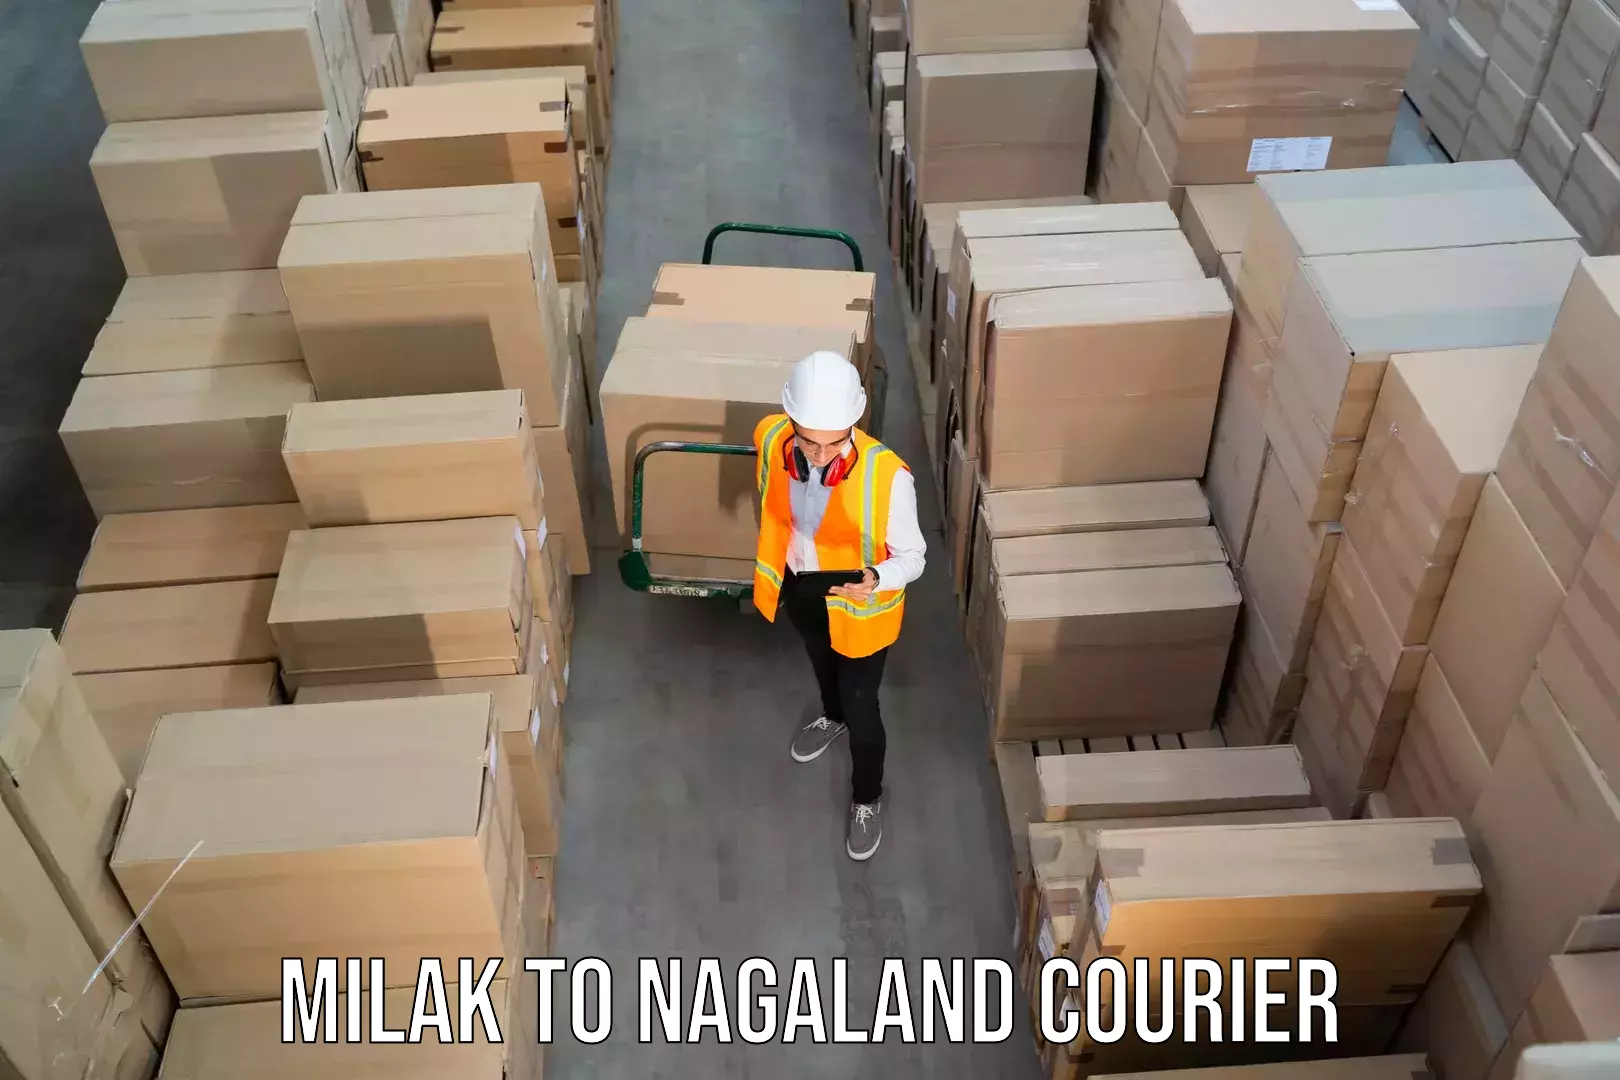 On-call courier service Milak to Nagaland